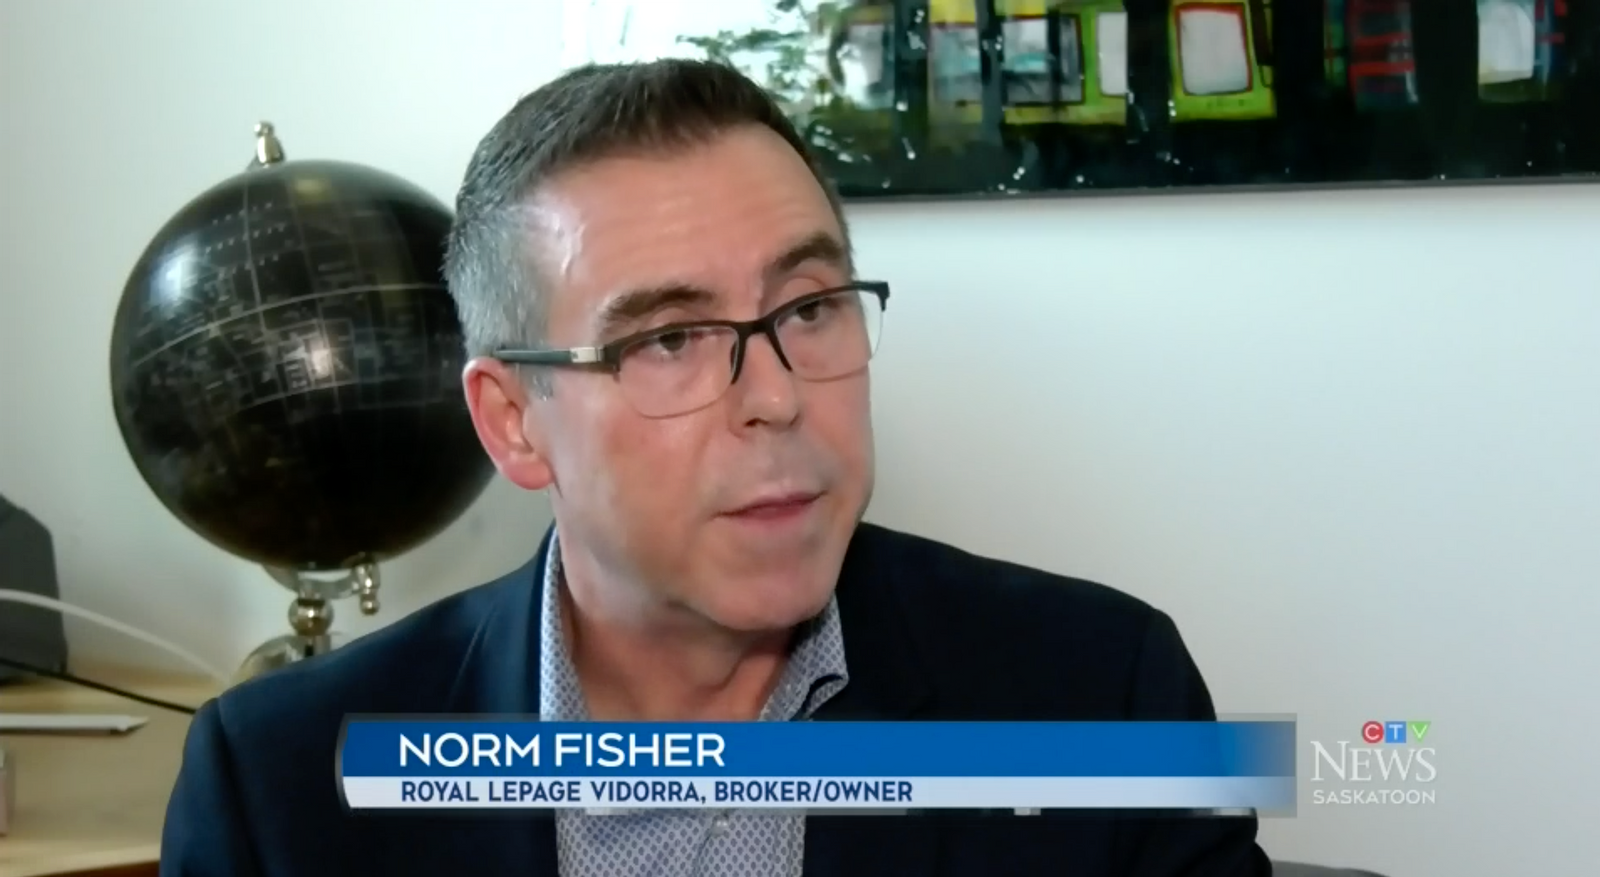 Norm chats with CTV's Chad Leroux about the 2019 and 2020 Saskatoon real estate market